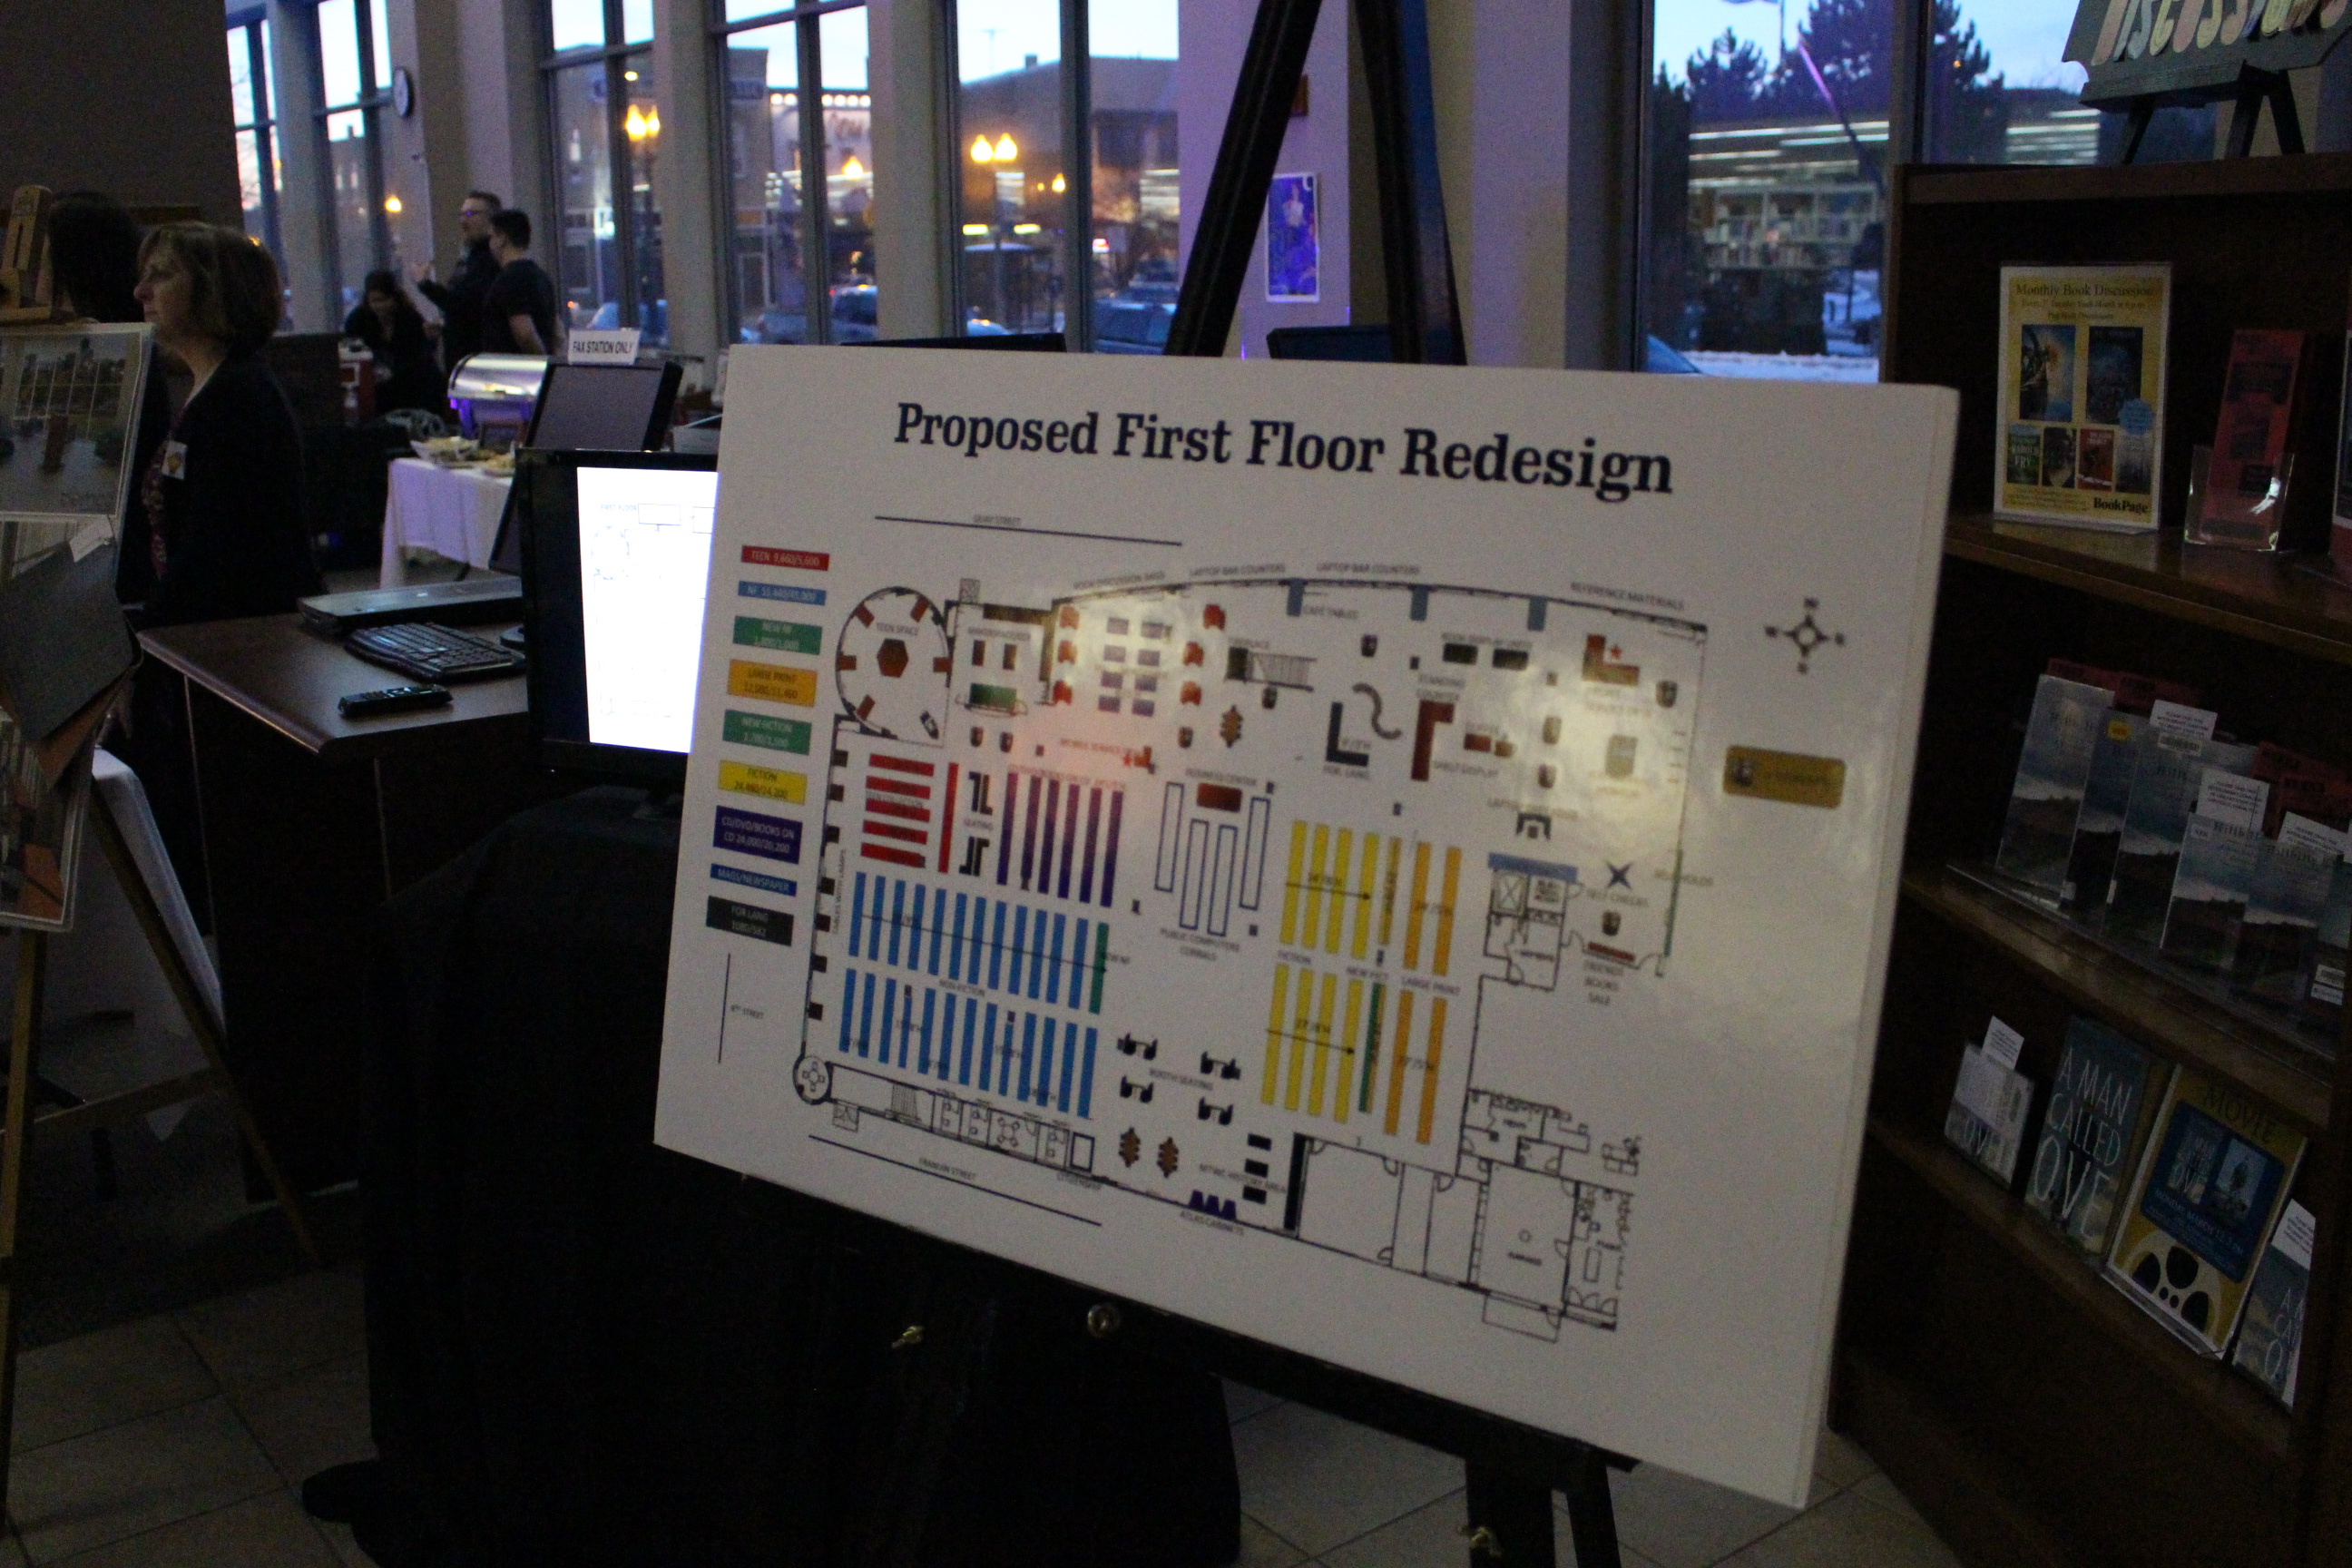 Floor plan poster displayed at event